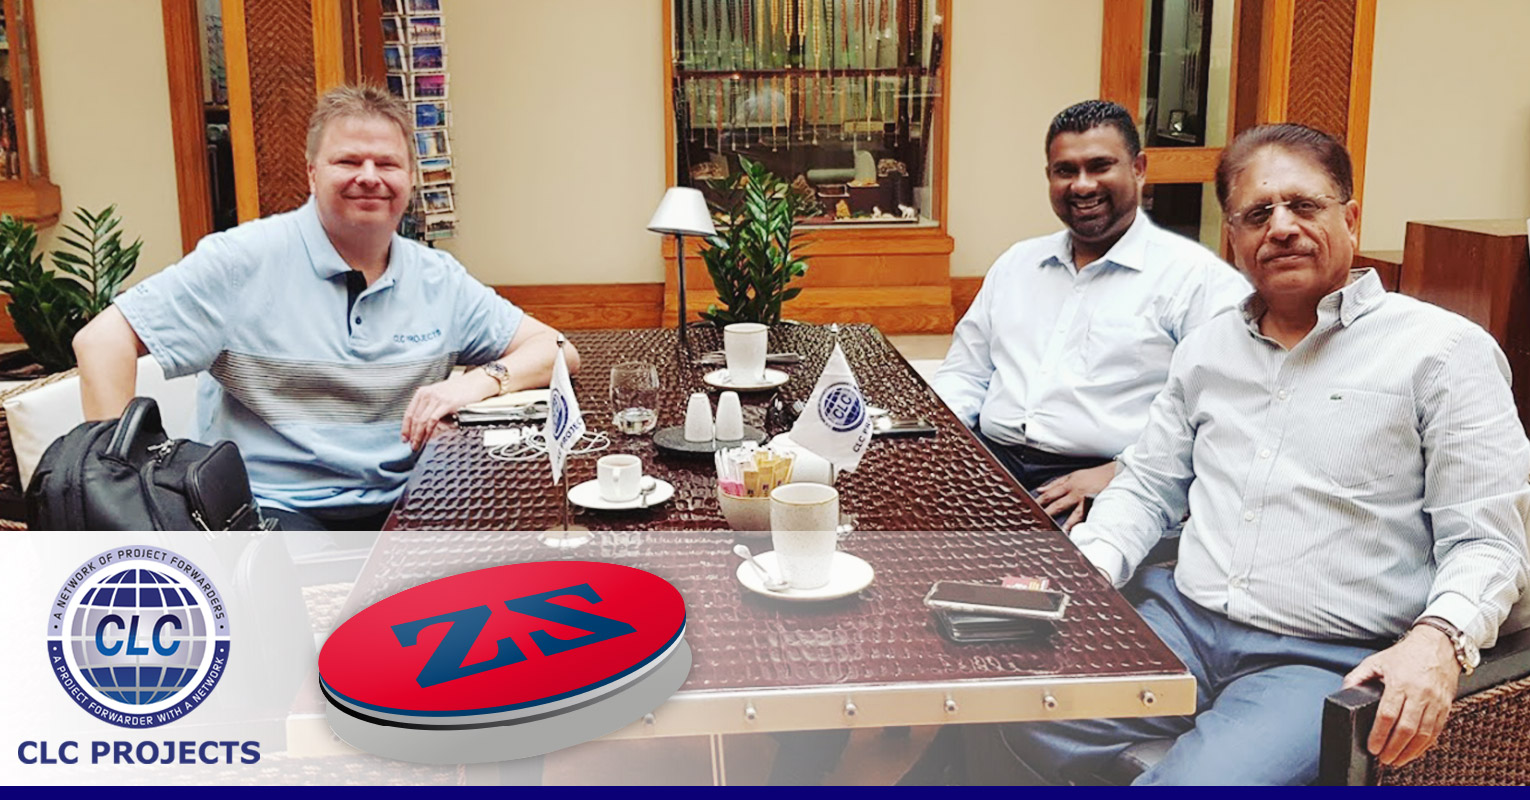 Zuhal and CLC Projects met in Dubai ahead of Breakbulk Middle East